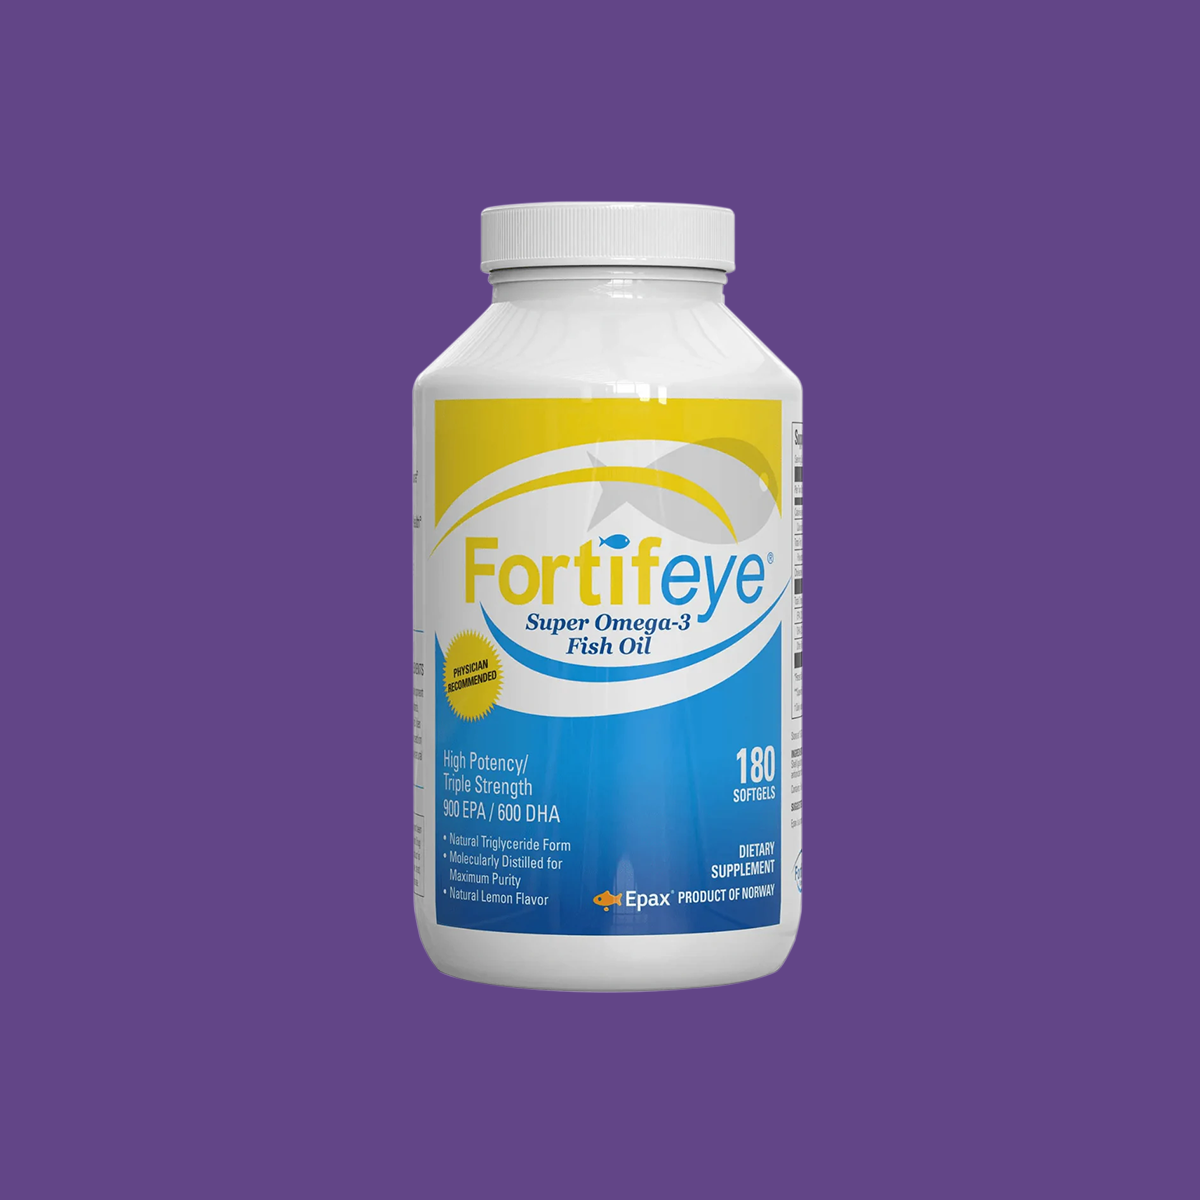 Fortifeye Super Omega-3 Fish Oil for Dry Eye Relief (180ct 3 Month Supply)